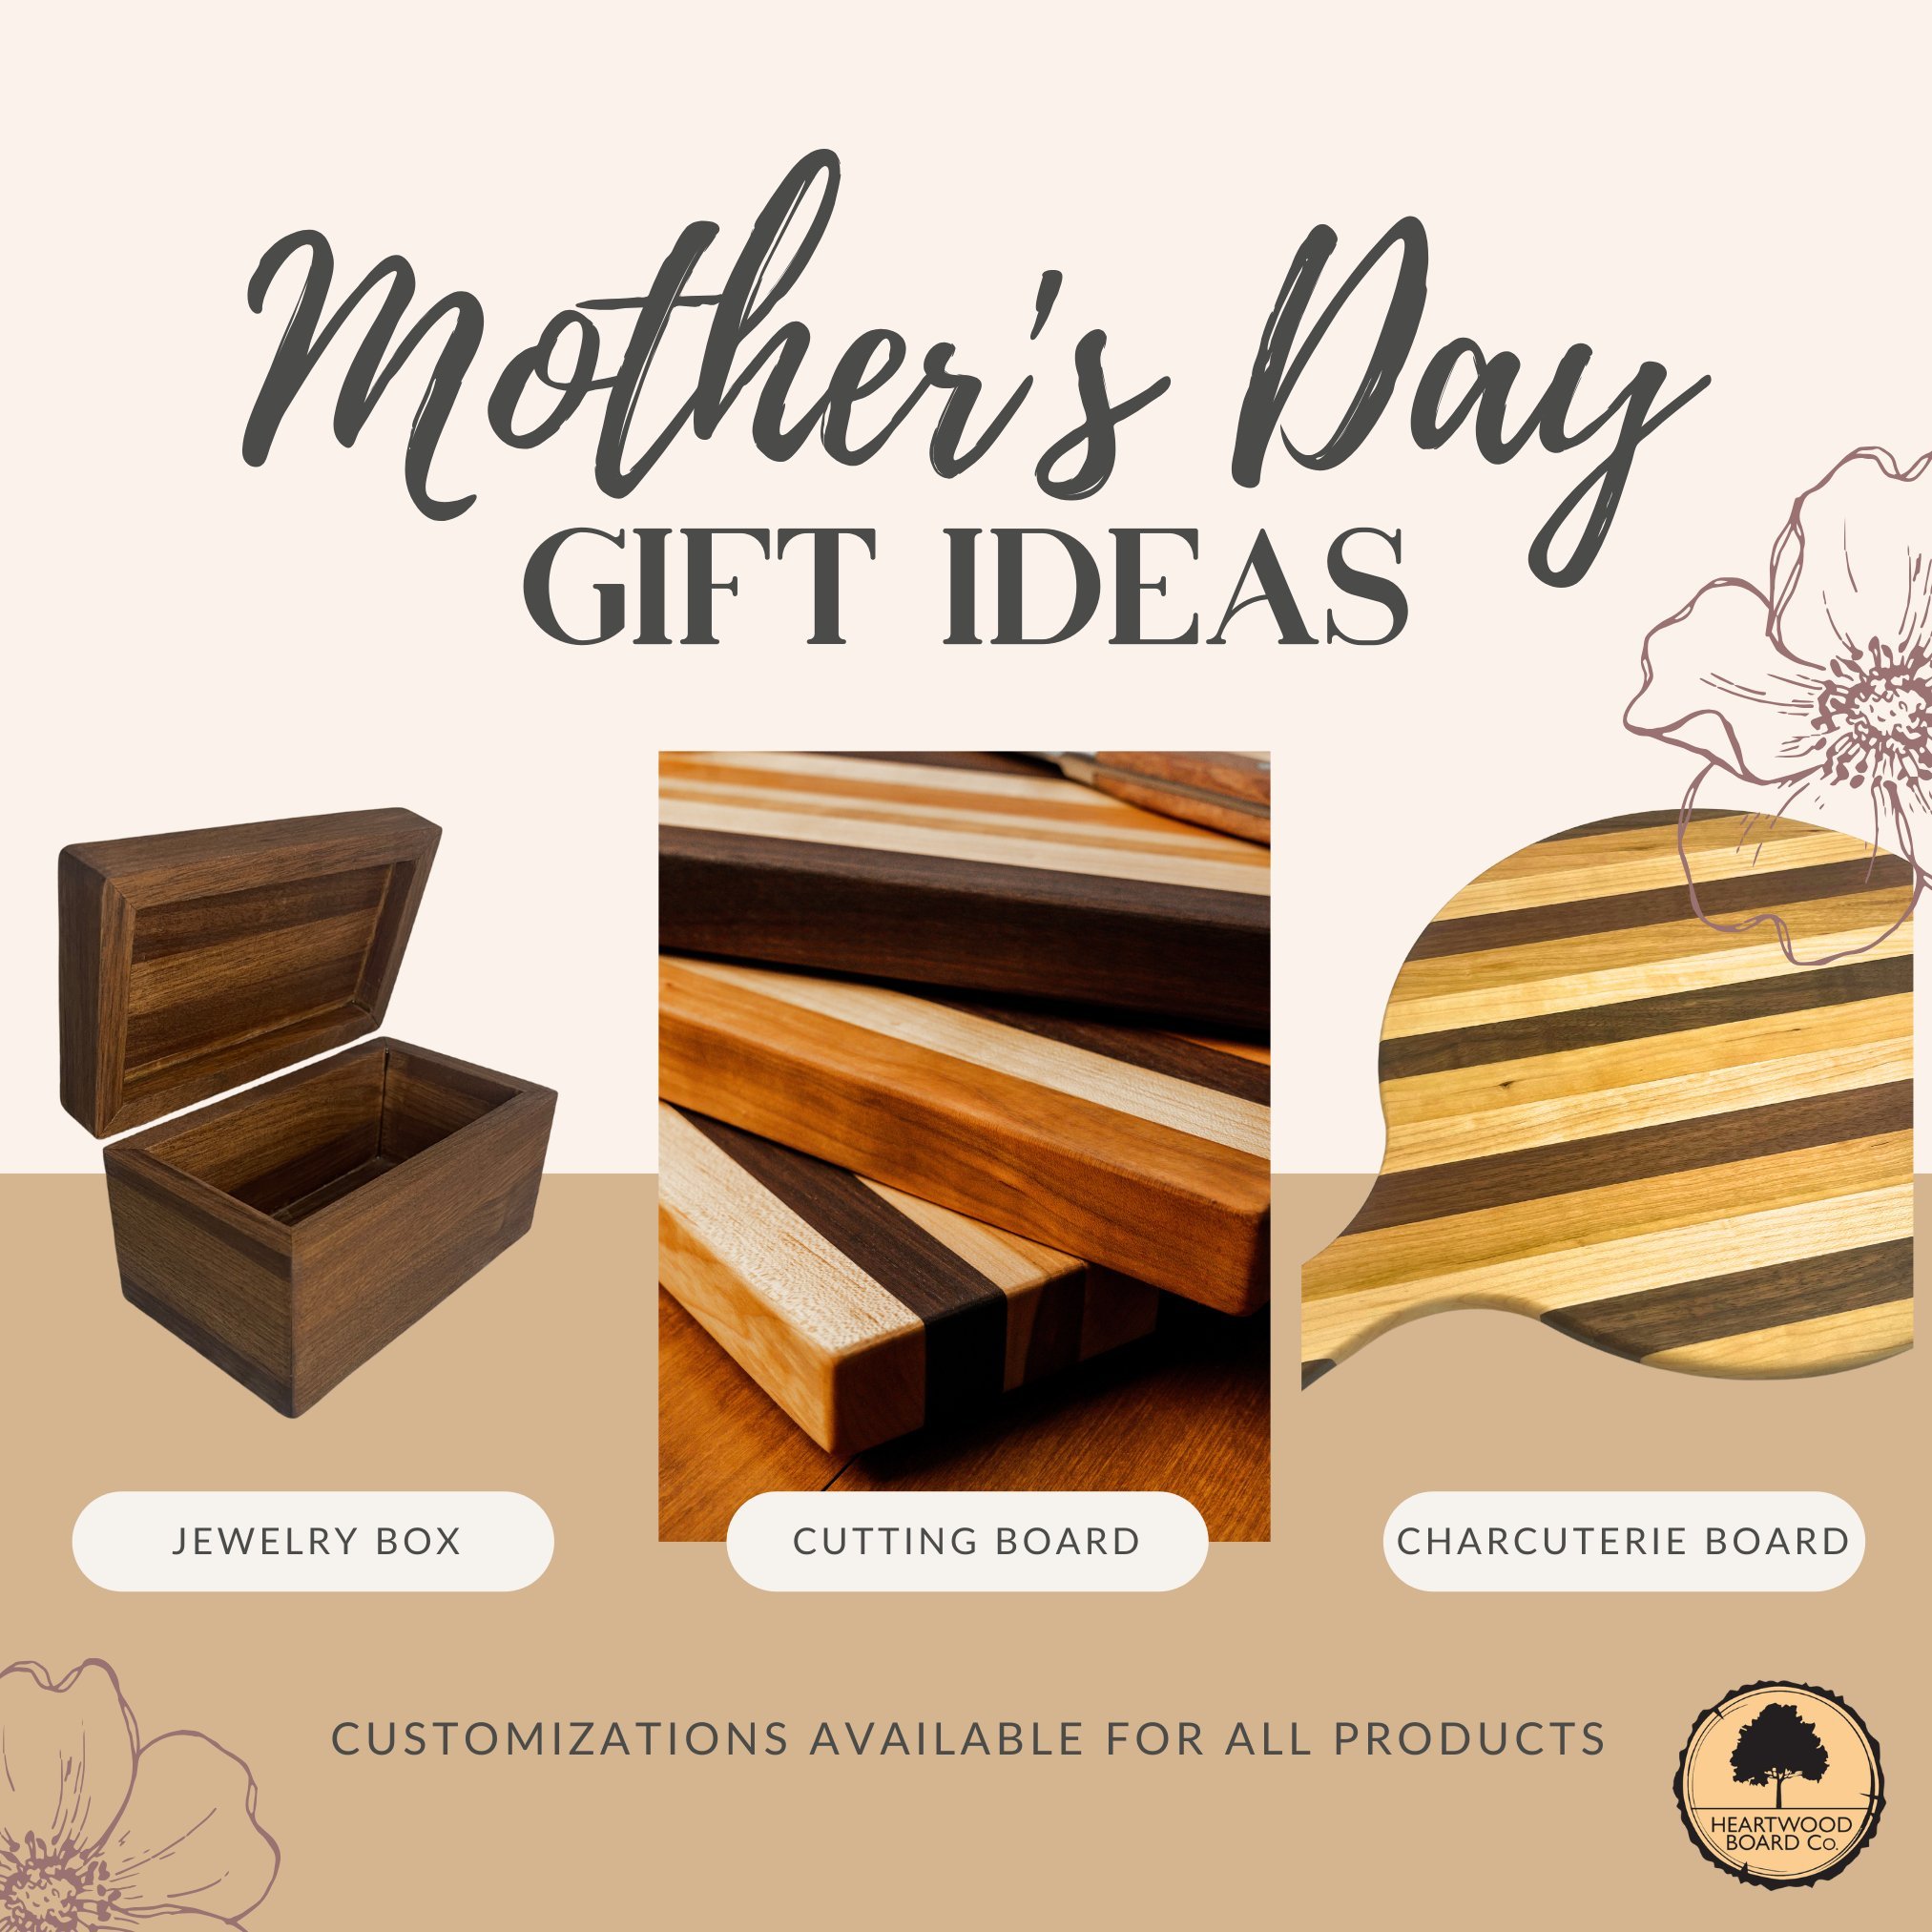 Choose the perfect Mother's Day gift this year ✨ 

Shop online or send us a message to get your gift ready before the holiday. 🫶

-- 

#supportlocal #gotogtown #lex #kitchen #shoplocal #handcrafted #woodworking #scottcounty #charcuterie #cuttingboar